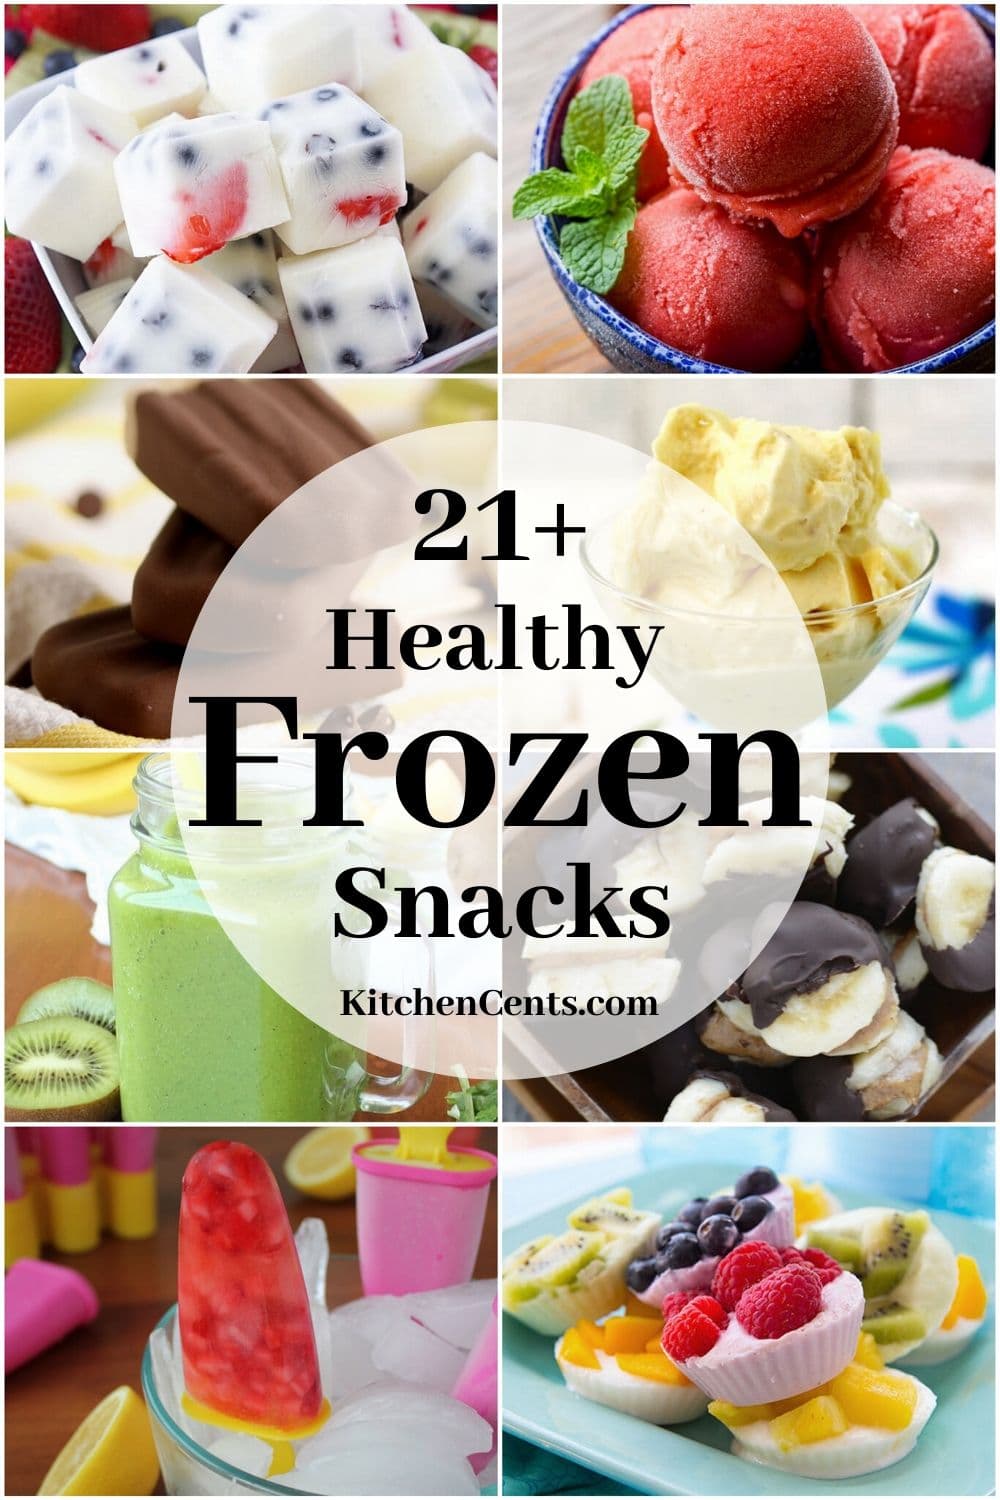 21+ Healthy Frozen Snacks: perfect for a healthy lifestyle - Kitchen Cents